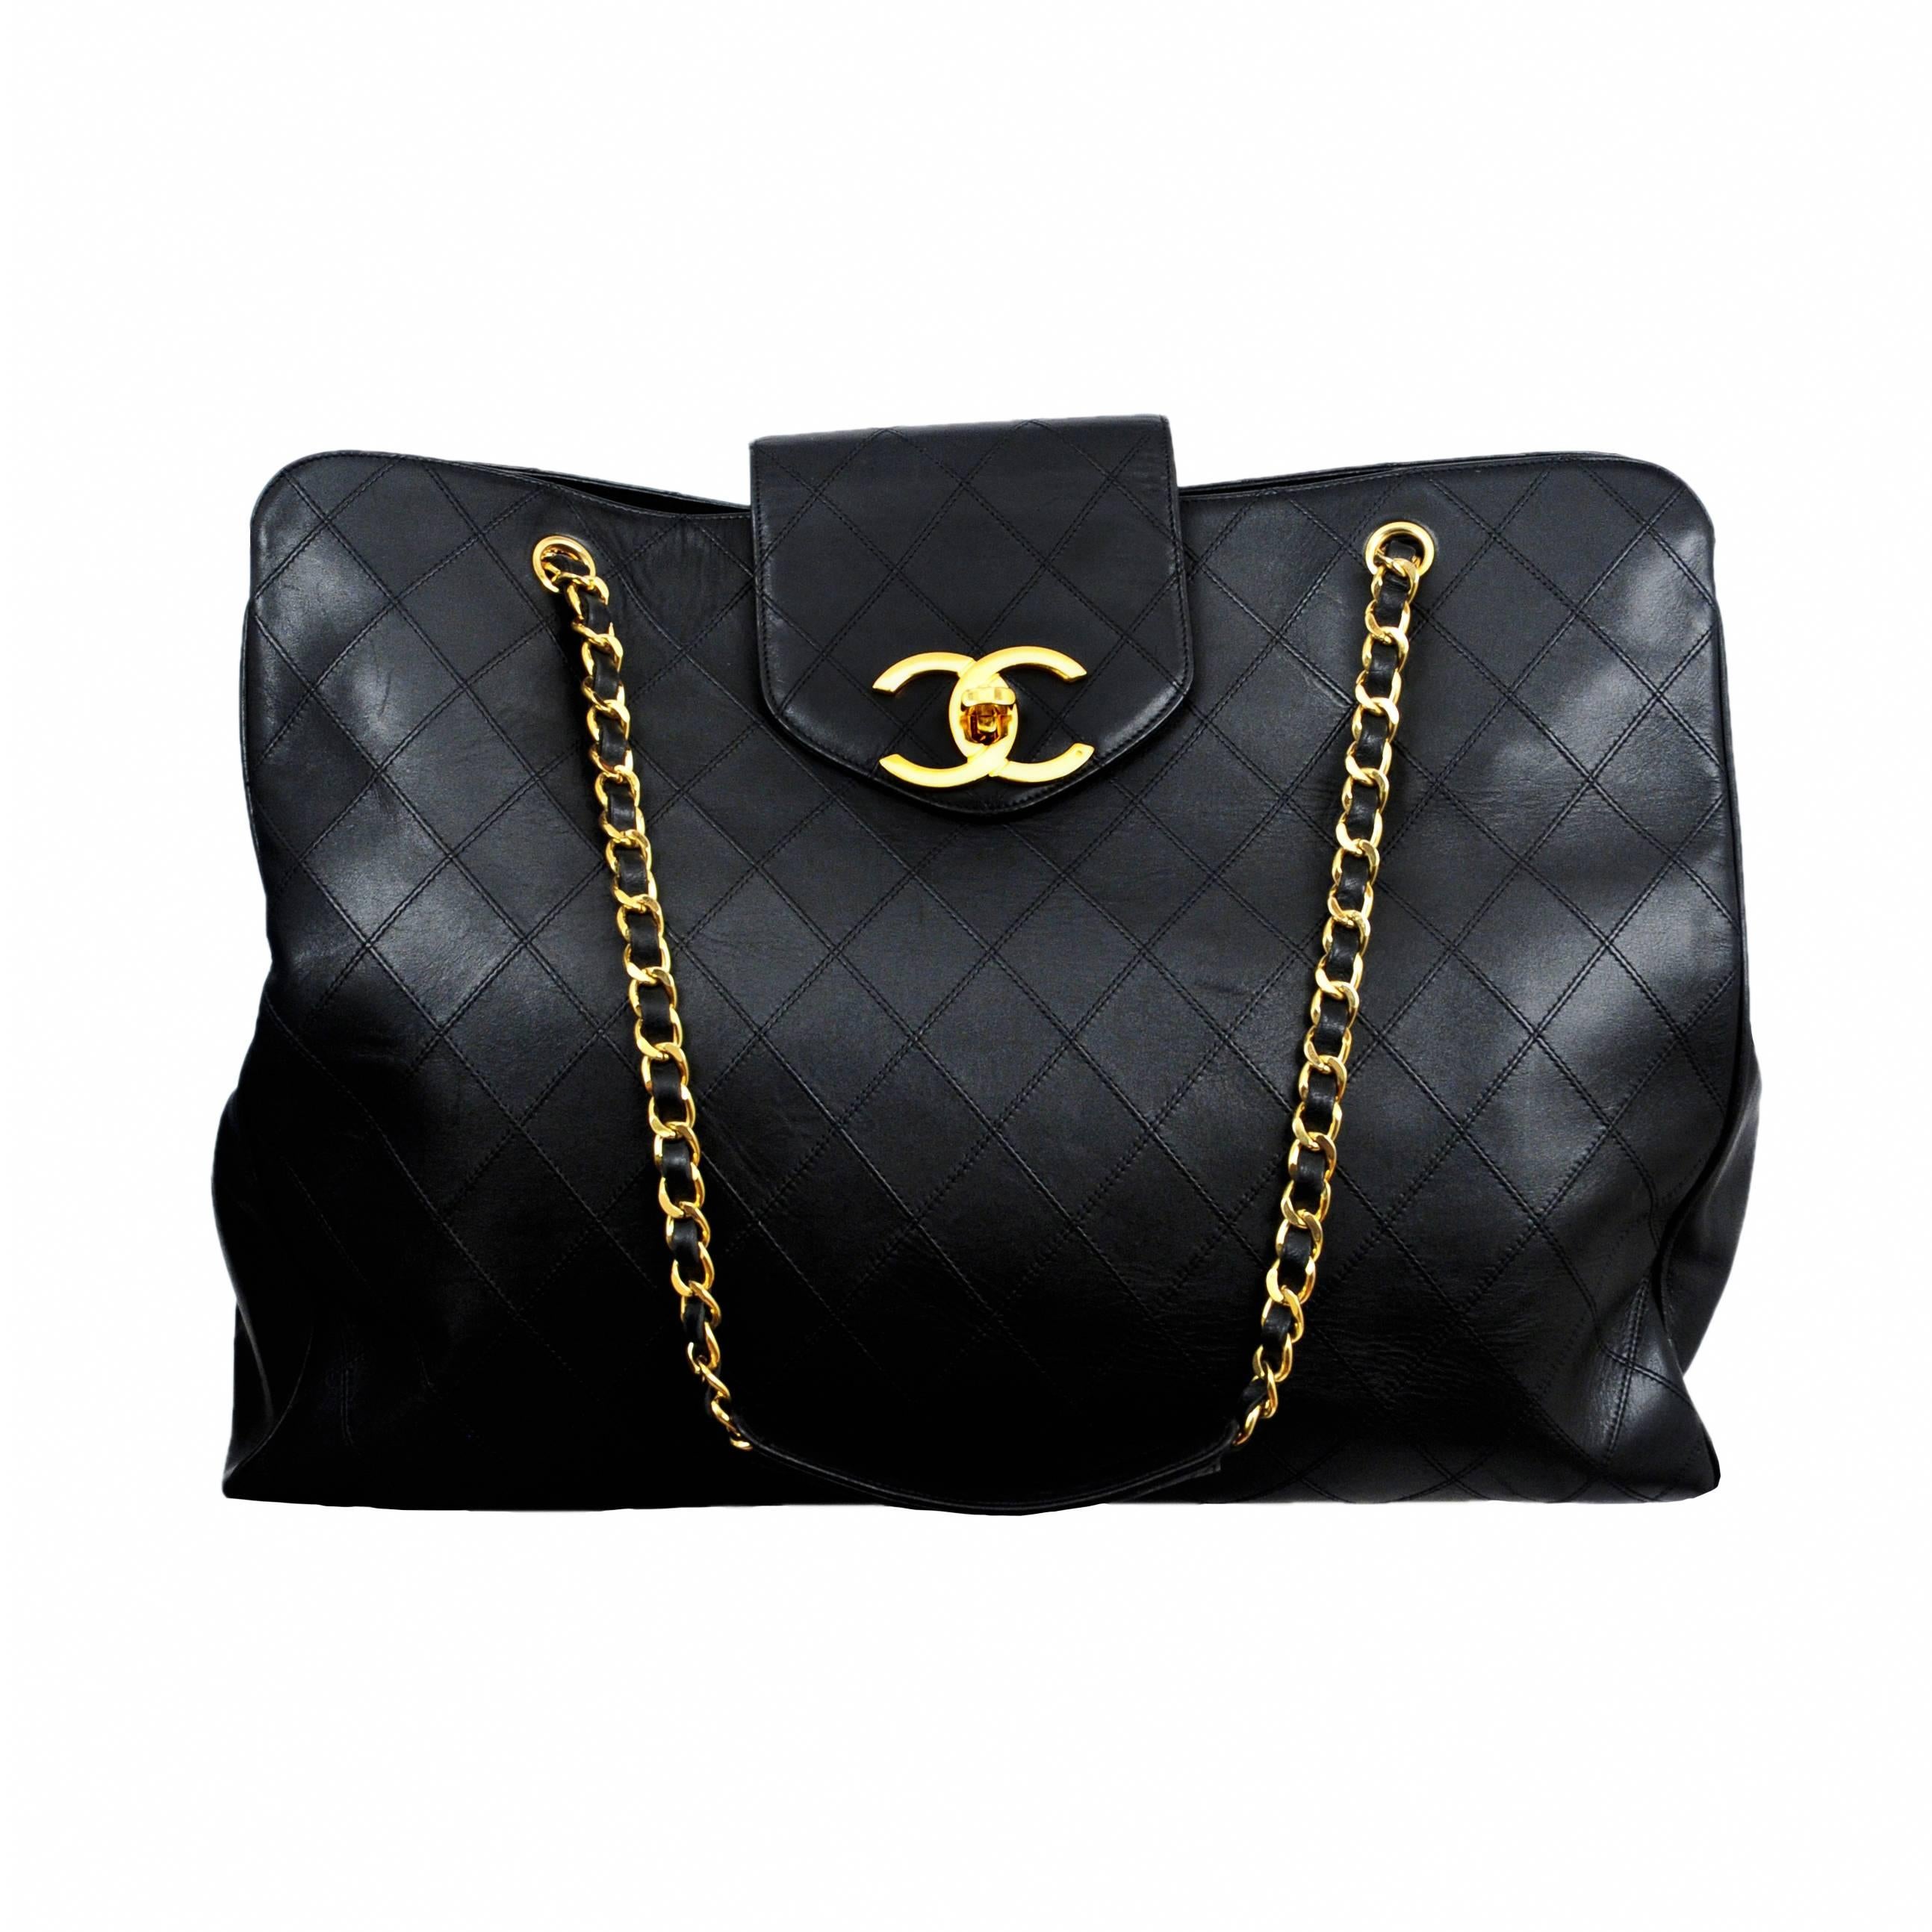 Chanel Lambskin Quilted Leather Overnight bag